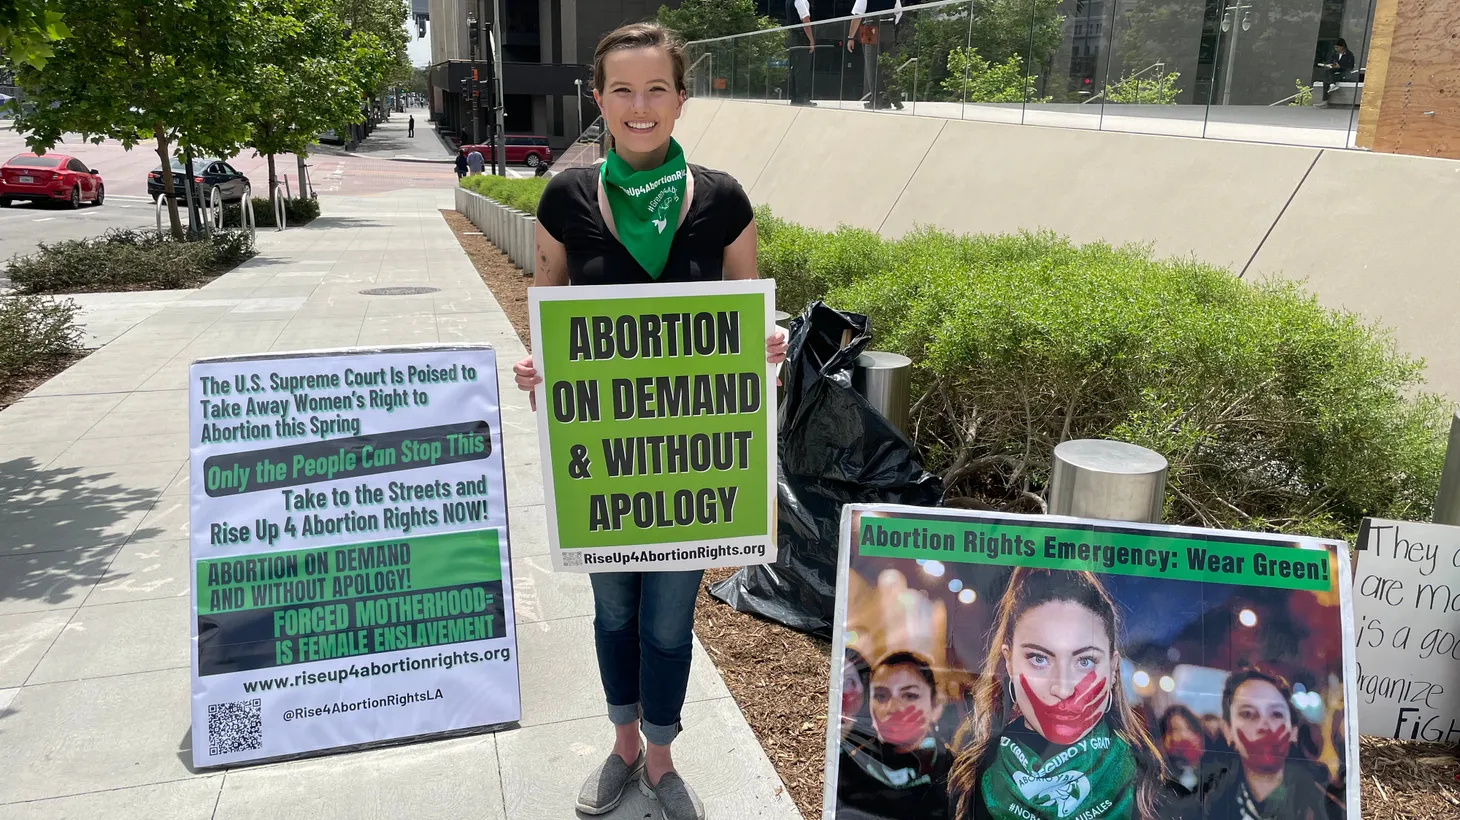 Skyler Soloman handed out green scarves to demonstrators because it has come to symbolize the pro-choice movement.